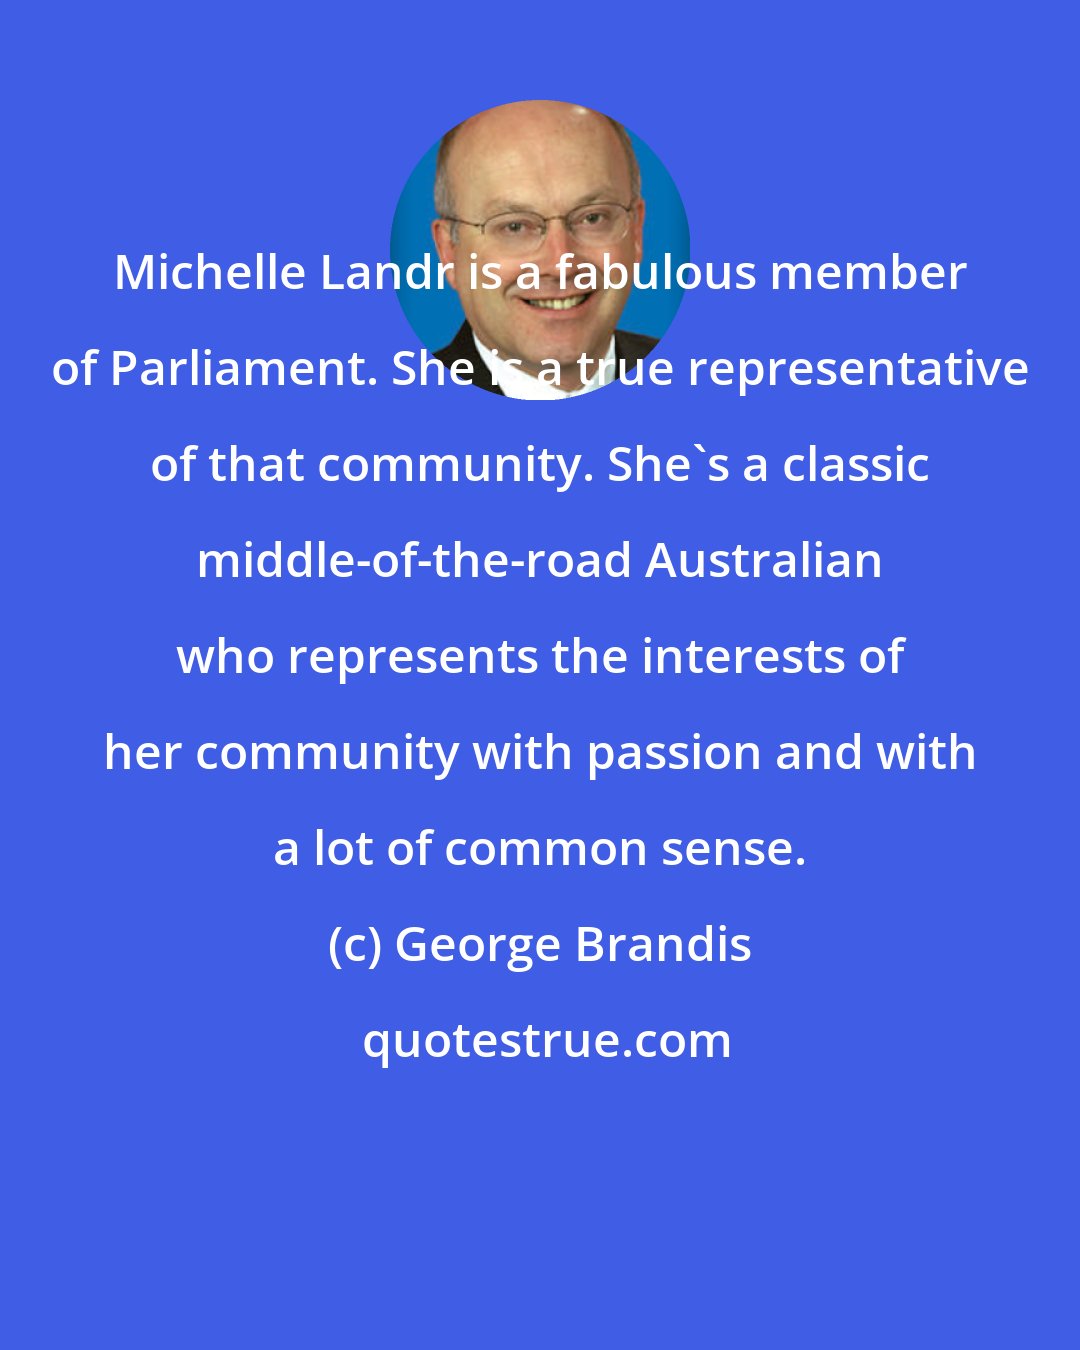 George Brandis: Michelle Landr is a fabulous member of Parliament. She is a true representative of that community. She's a classic middle-of-the-road Australian who represents the interests of her community with passion and with a lot of common sense.